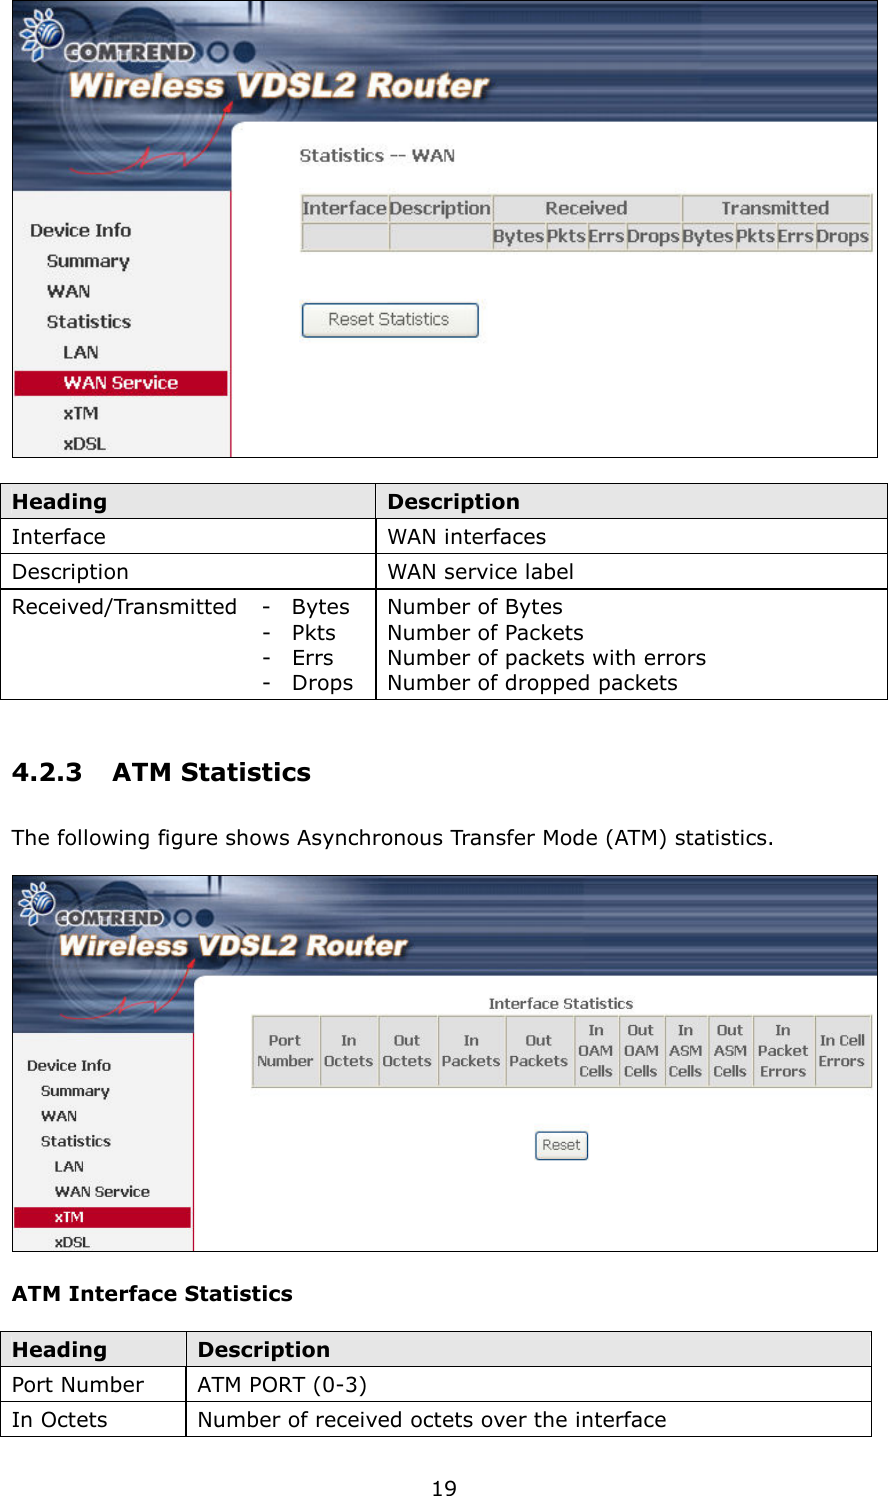   19   Heading  Description Interface  WAN interfaces Description  WAN service label Received/Transmitted     -    Bytes                                                 -    Pkts                                                 -    Errs                                                 -    Drops Number of Bytes   Number of Packets   Number of packets with errors Number of dropped packets   4.2.3  ATM Statistics The following figure shows Asynchronous Transfer Mode (ATM) statistics.   ATM Interface Statistics  Heading  Description Port Number  ATM PORT (0-3) In Octets  Number of received octets over the interface 